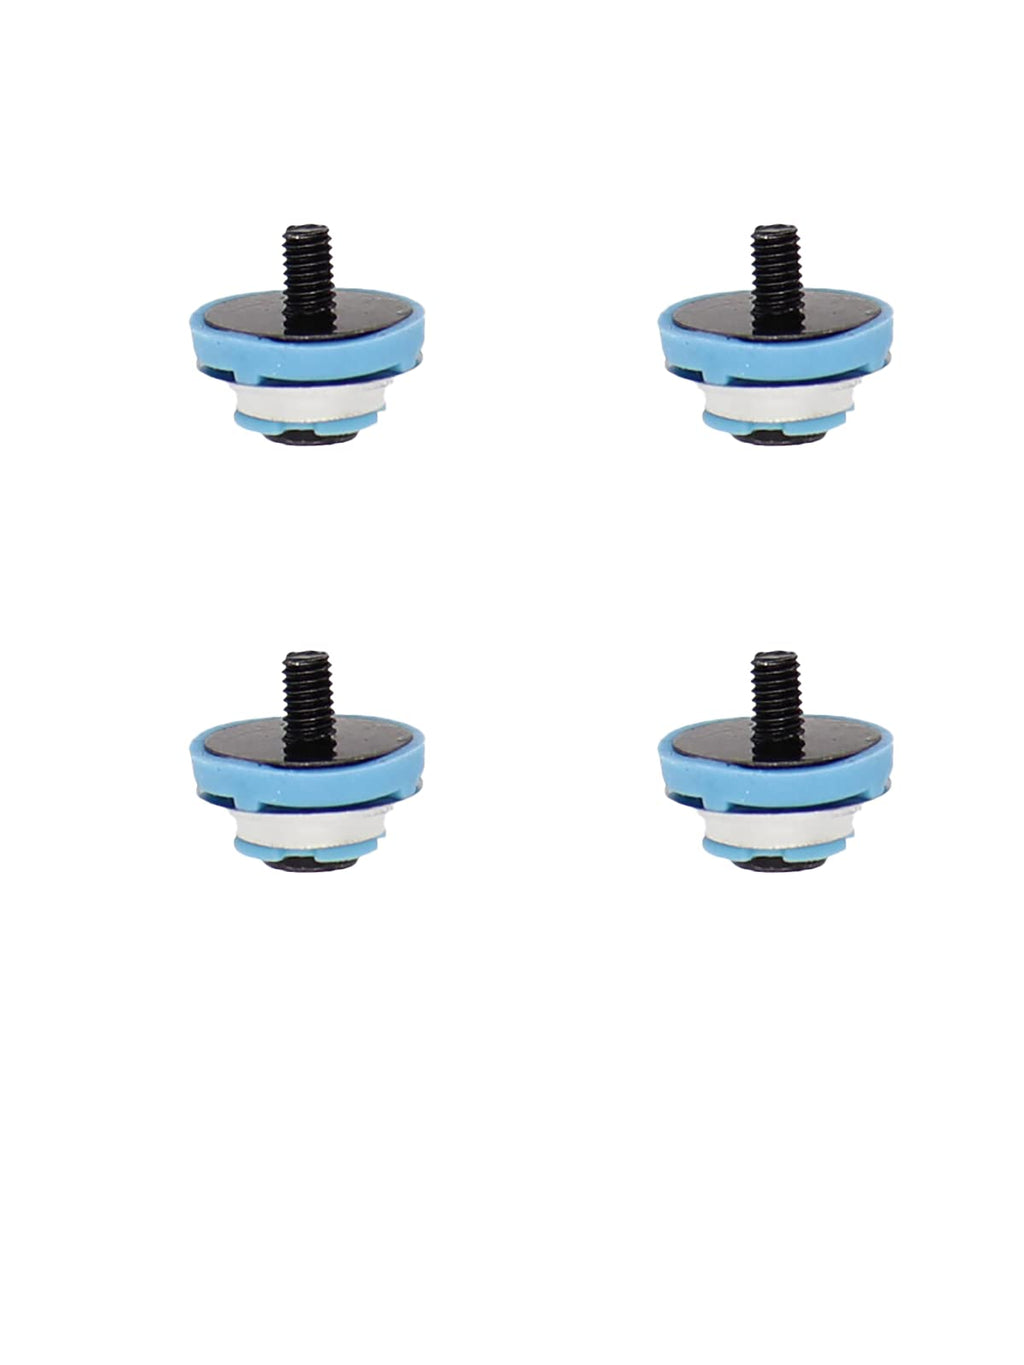  [AUSTRALIA] - LeFix 4 x Replacement for Screws Isolation Grommet Mute Mounting HP 2.5" SSD HDD 6000 6005 Pro 8000 8100 EliteDesk ProDesk G1 G2 594220-001/511945-003